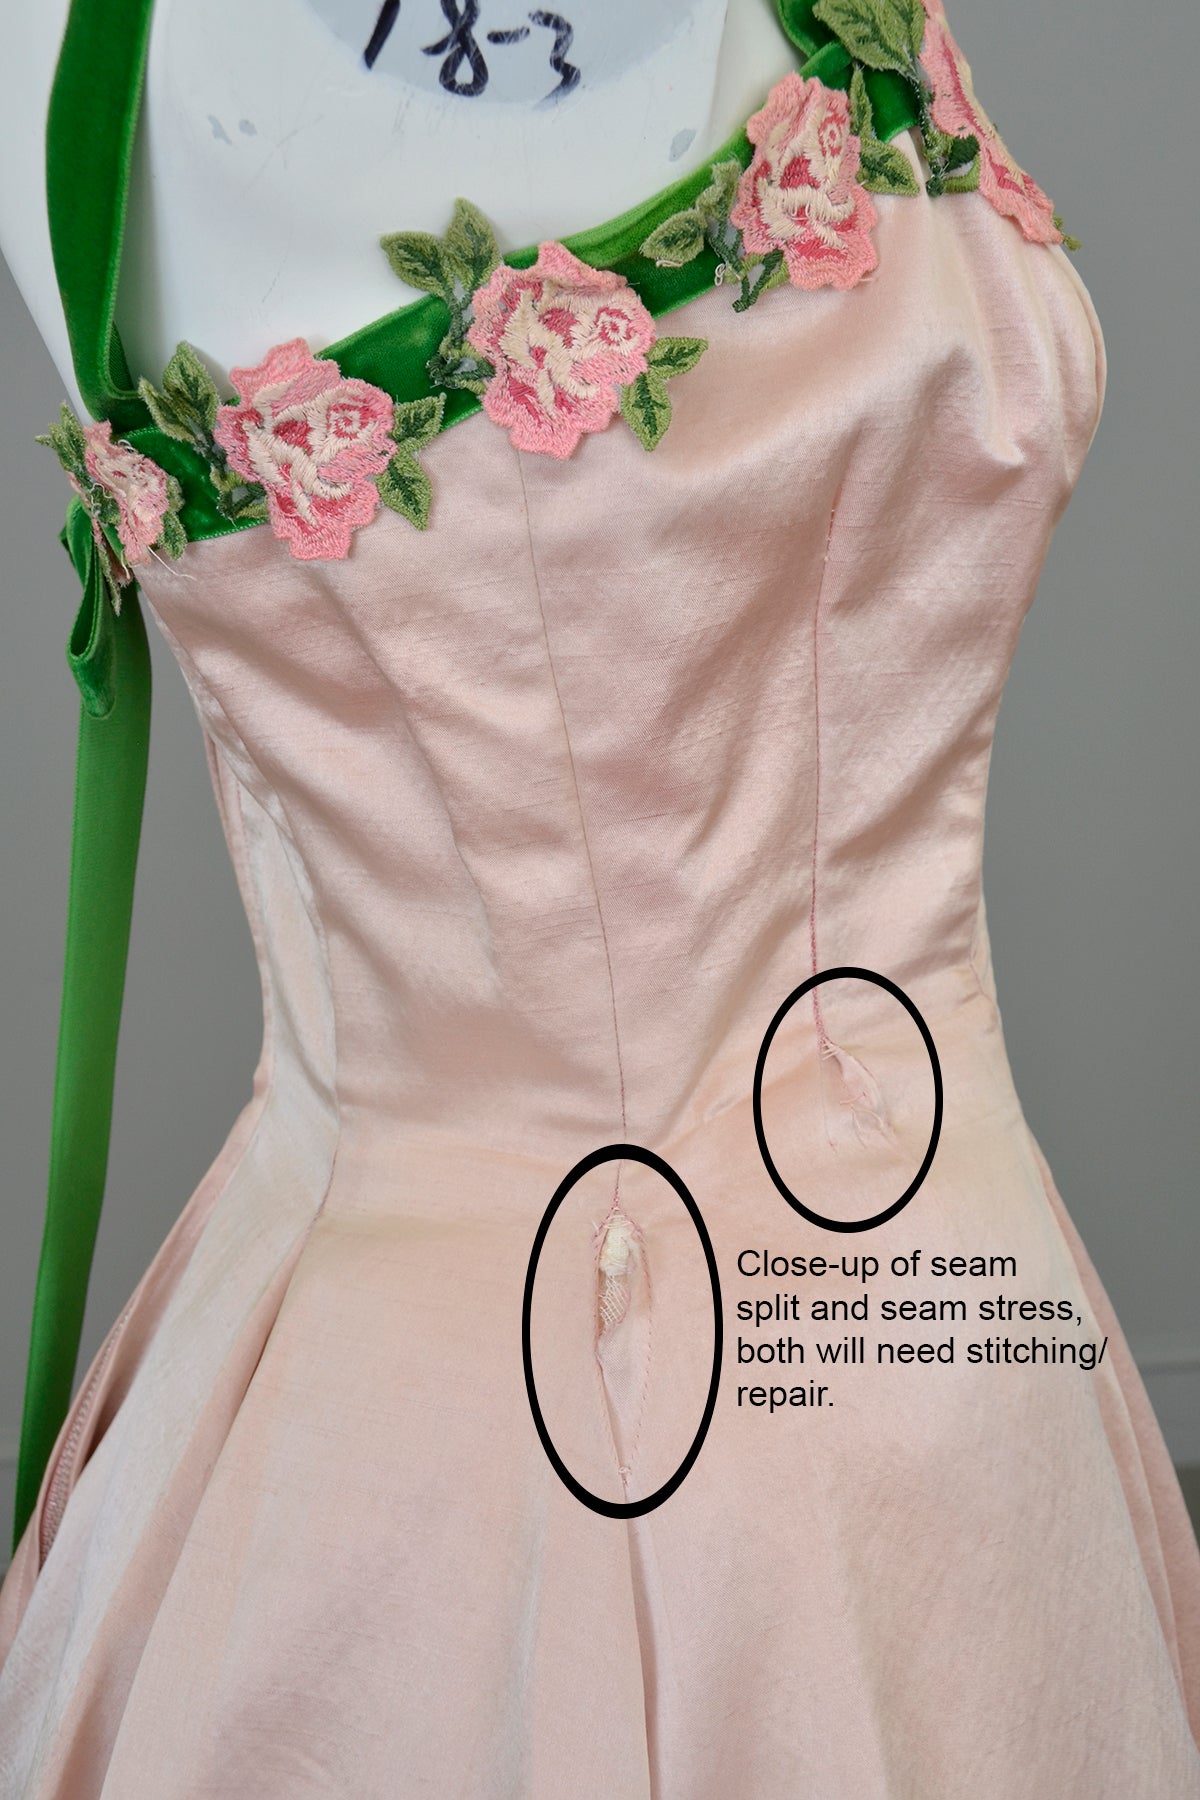 1950s Pale Pink Embroidered Flowers Trim Party Prom Dress